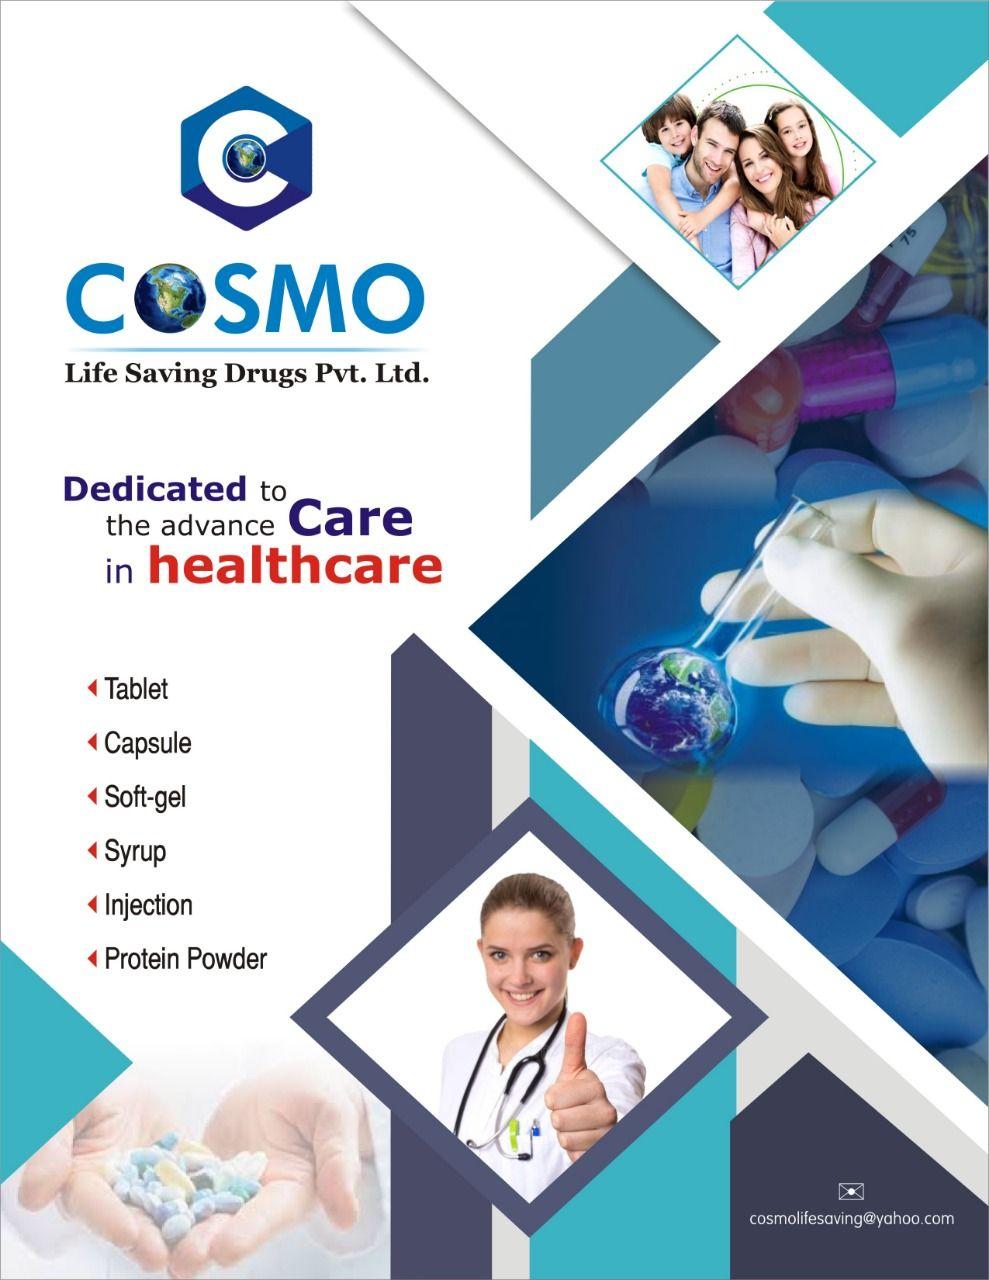 COSMO LIFE SAVING DRUGS PRIVATE LIMITED